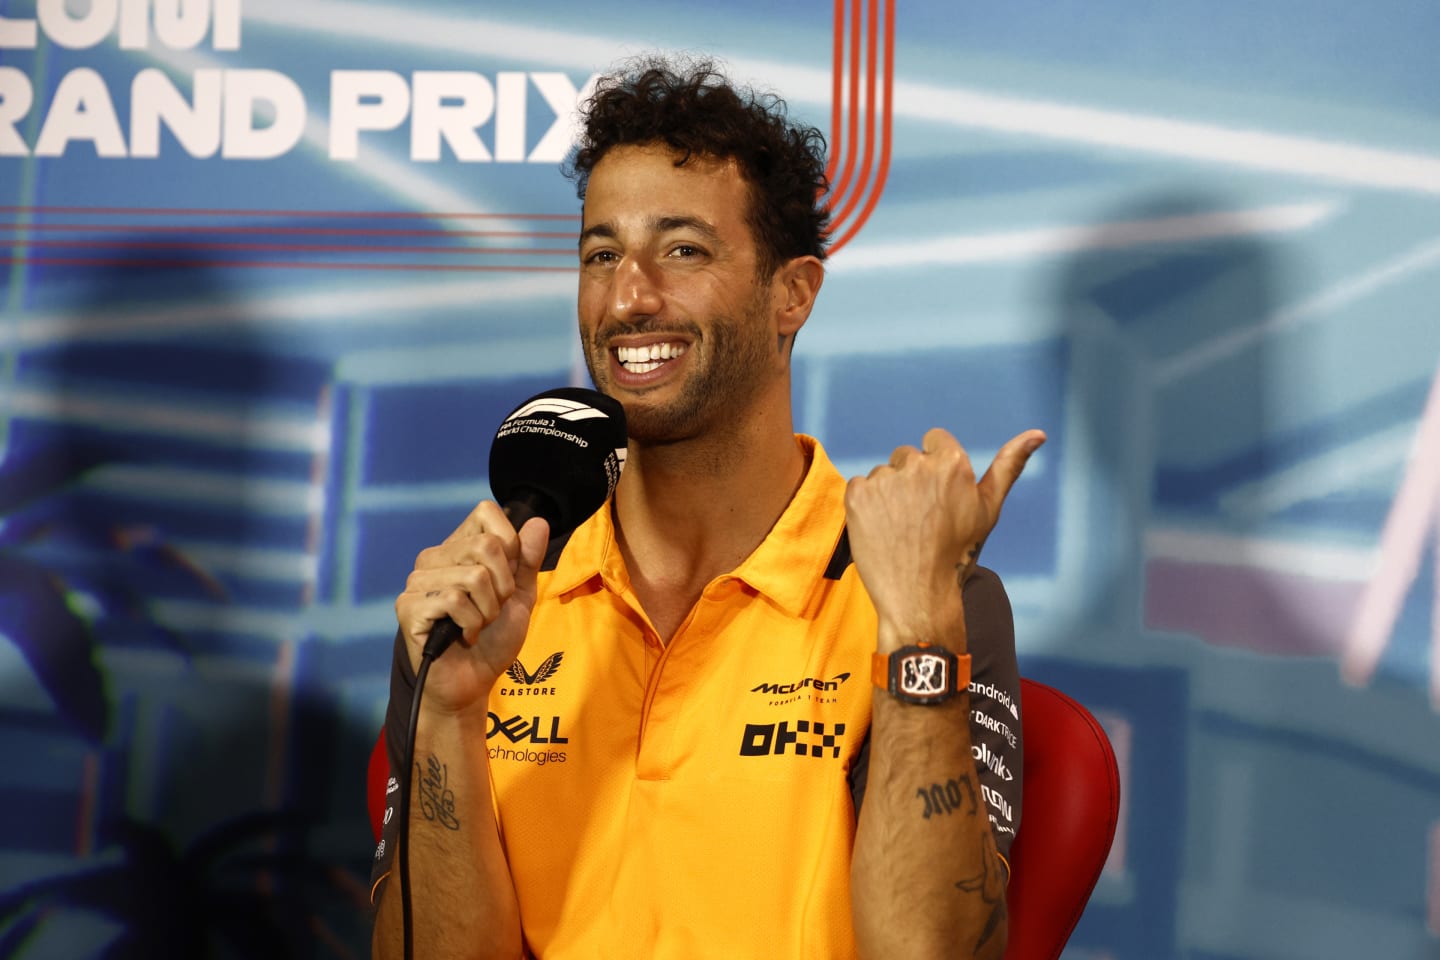 MIAMI, FLORIDA - MAY 06: Daniel Ricciardo of Australia and McLaren talks in the Drivers Press Conference prior to practice ahead of the F1 Grand Prix of Miami at the Miami International Autodrome on May 06, 2022 in Miami, Florida. (Photo by Jared C. Tilton/Getty Images)